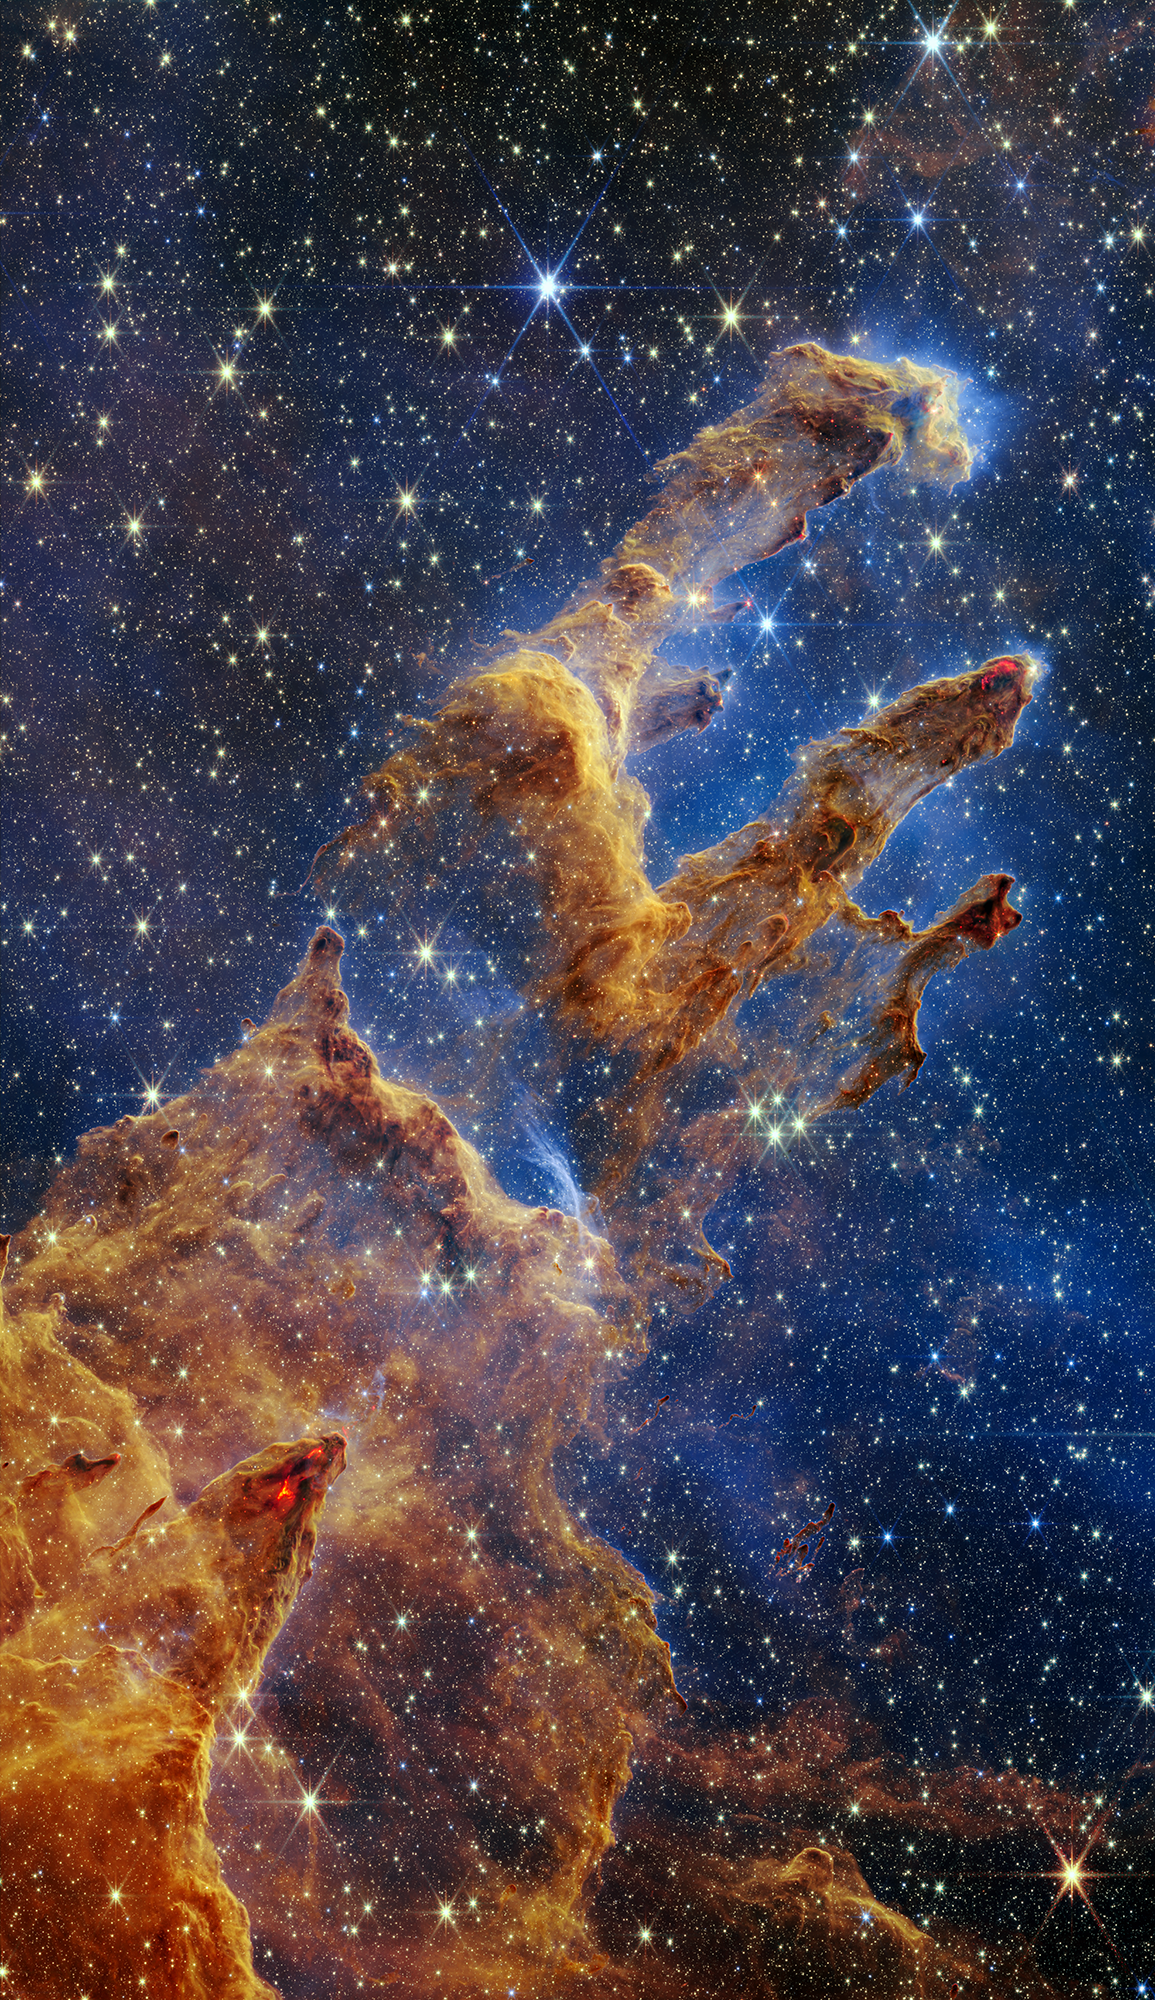 The Pillars of Creation, a region of new star formation within the Eagle Nebular, as imaged by the James Webb Space Telescope